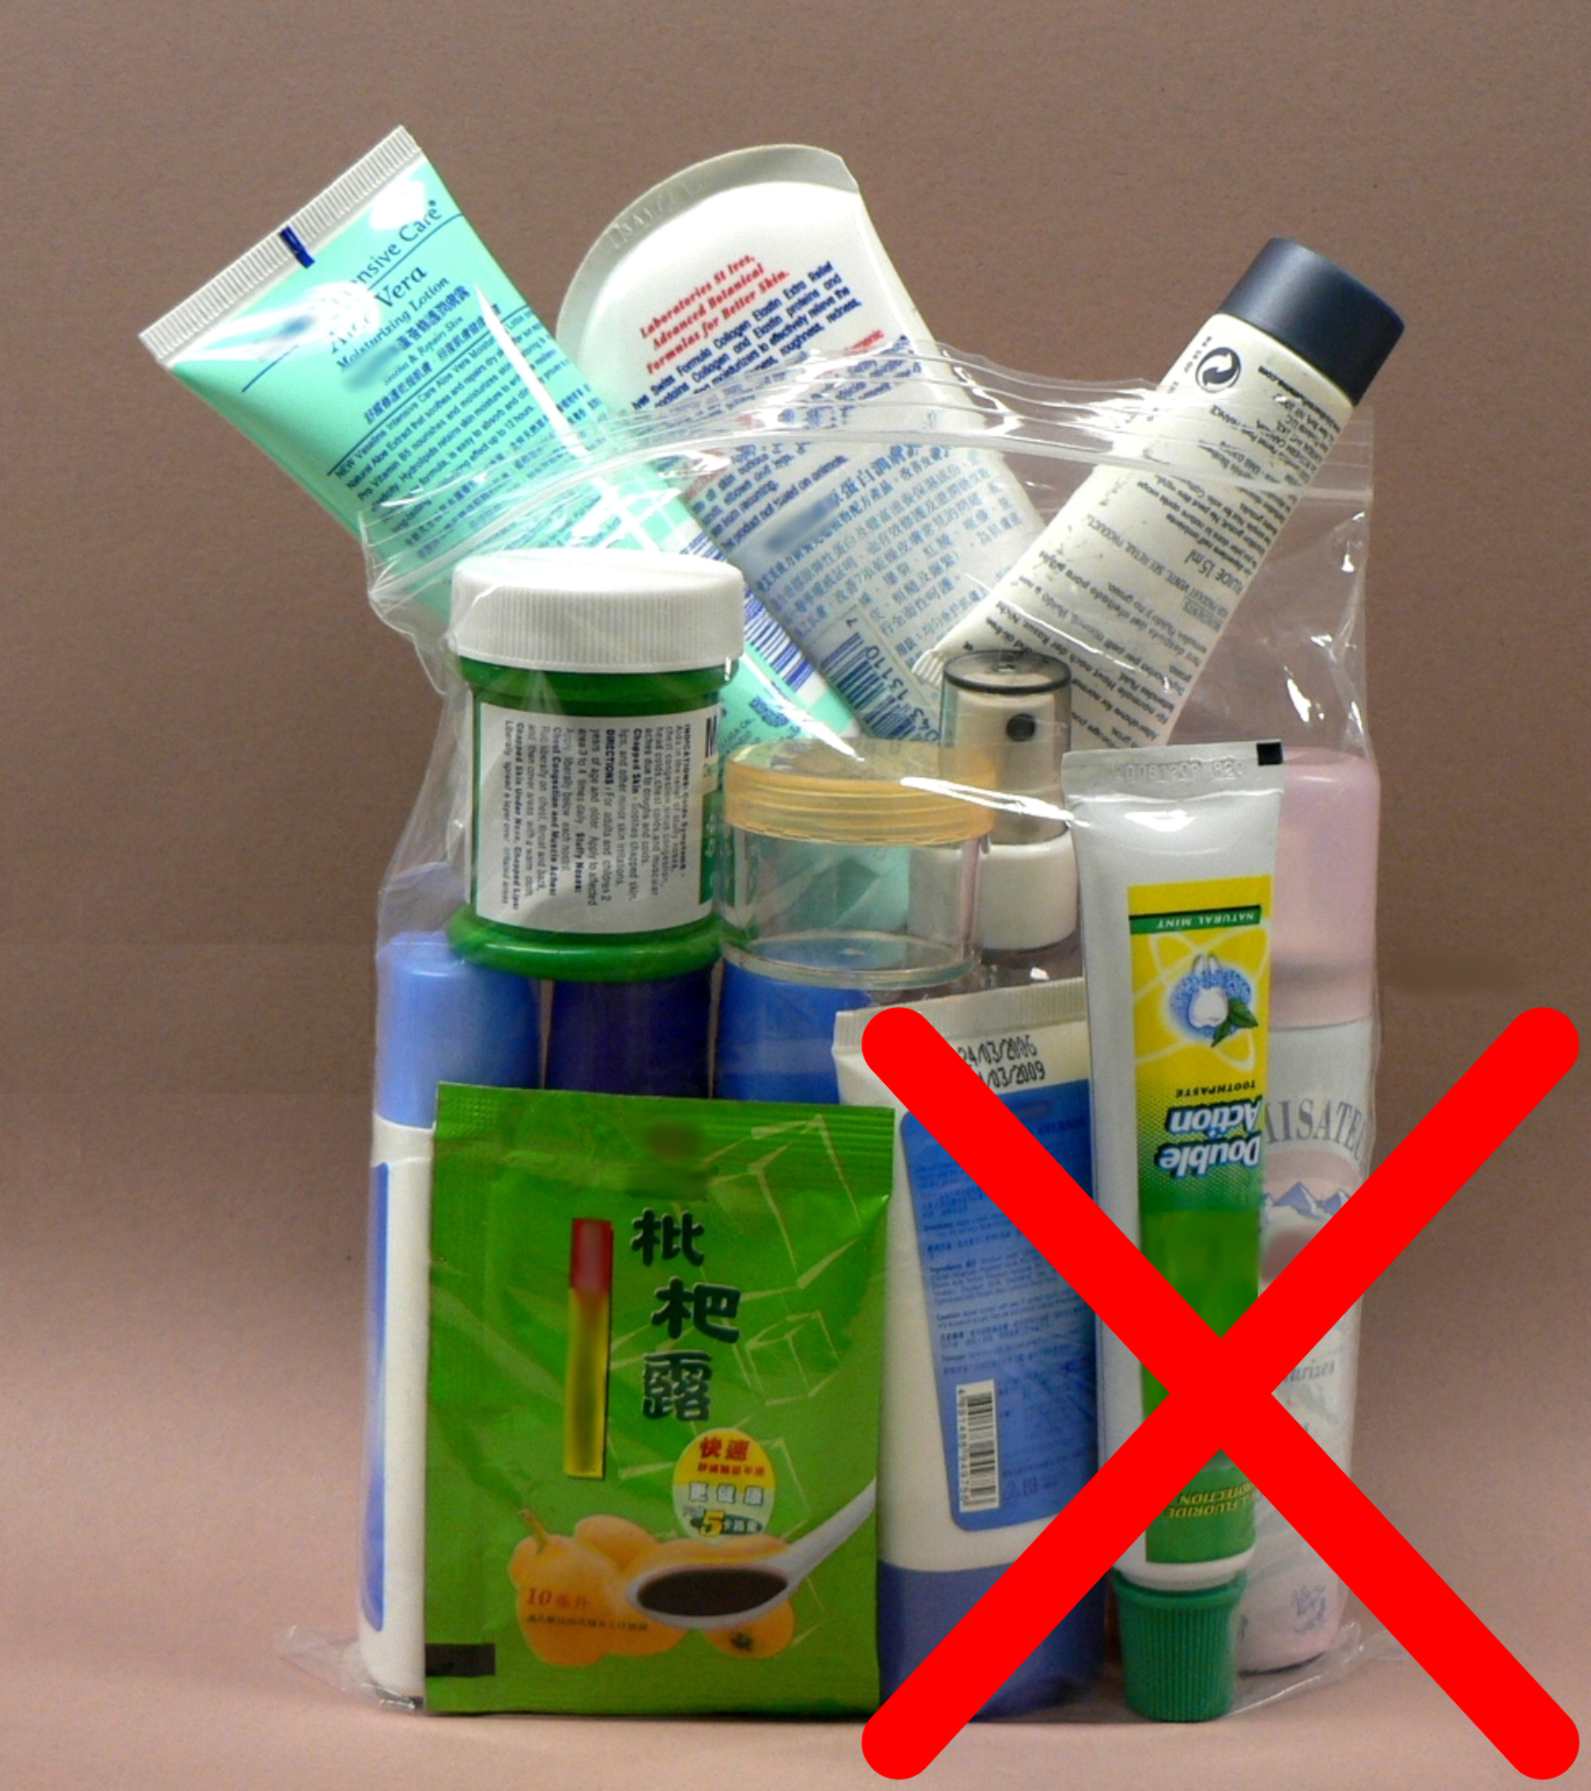 The containers must fit comfortably within the transparent plastic bag, which should be completely closed.